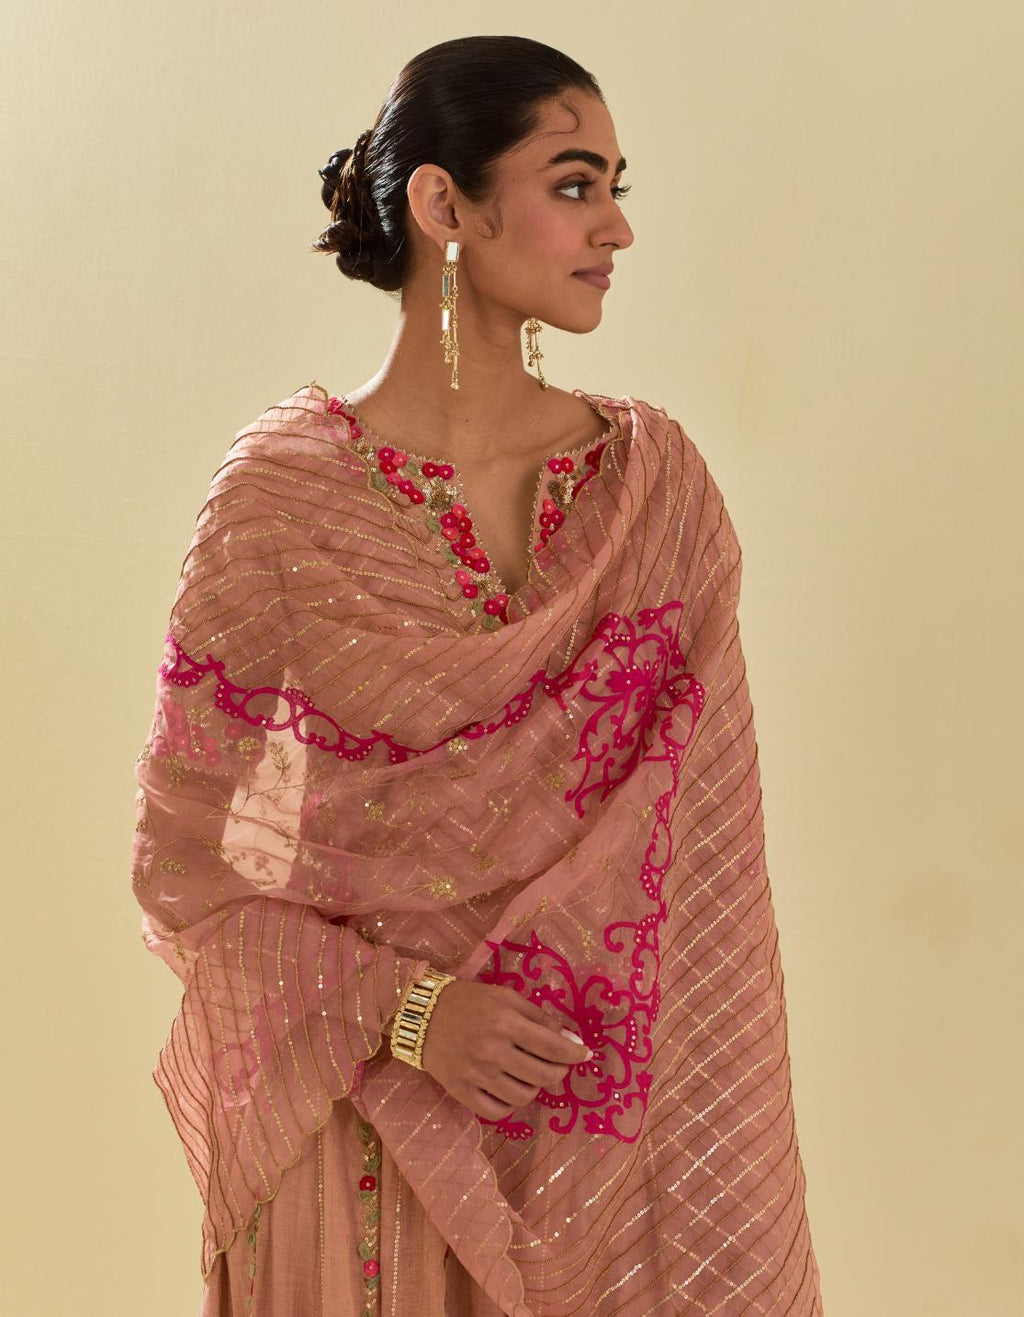 Pink silk organza dupatta with delicate gold zari embroidery & silk applique work, highlighted with gold sequins and beads.